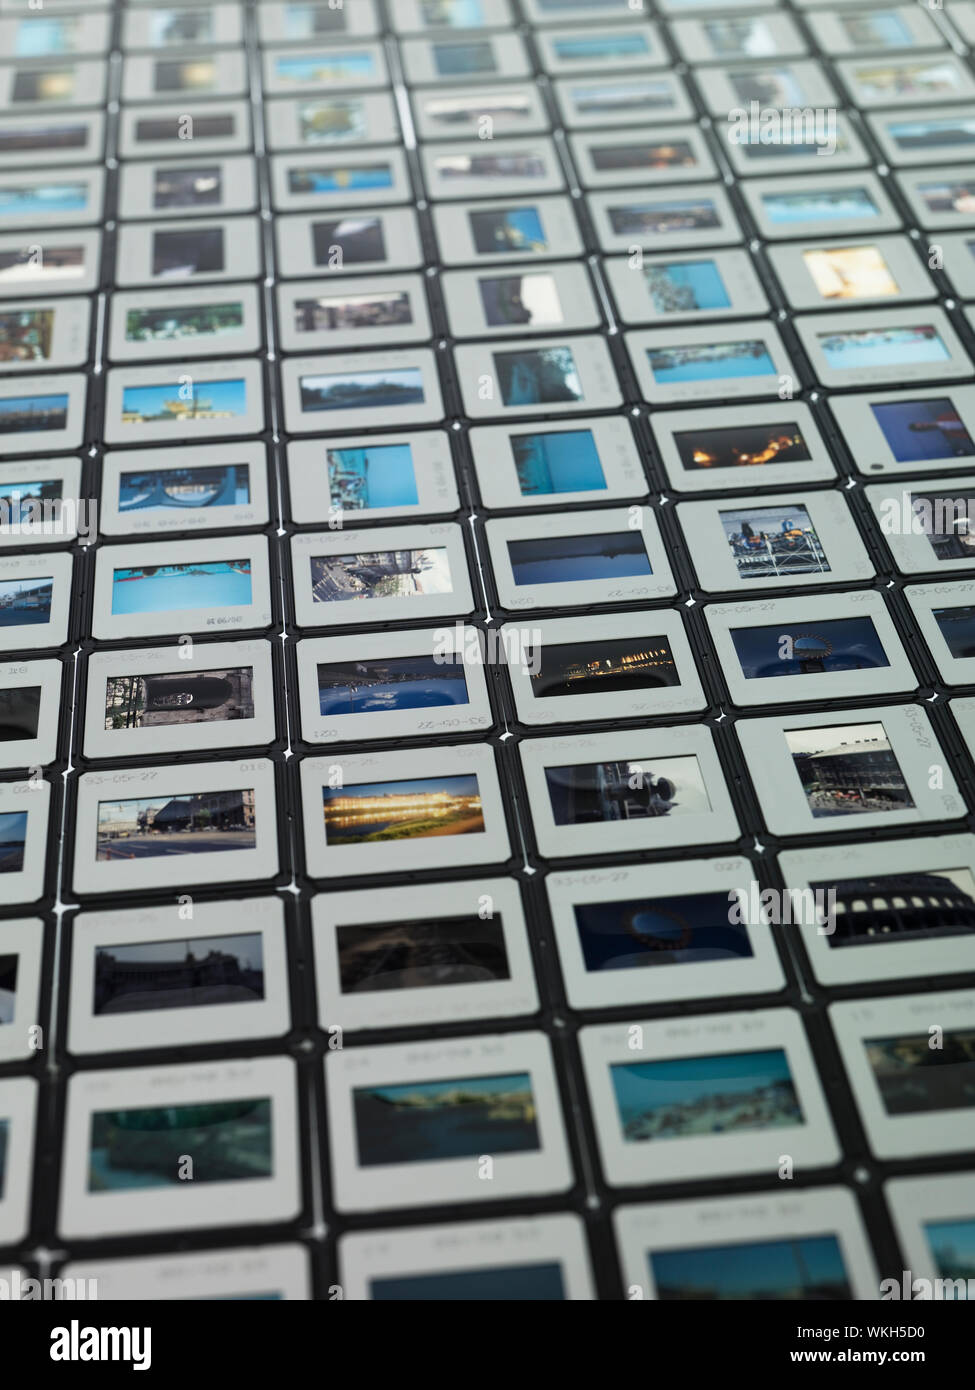 Lots of diapositive slides Stock Photo